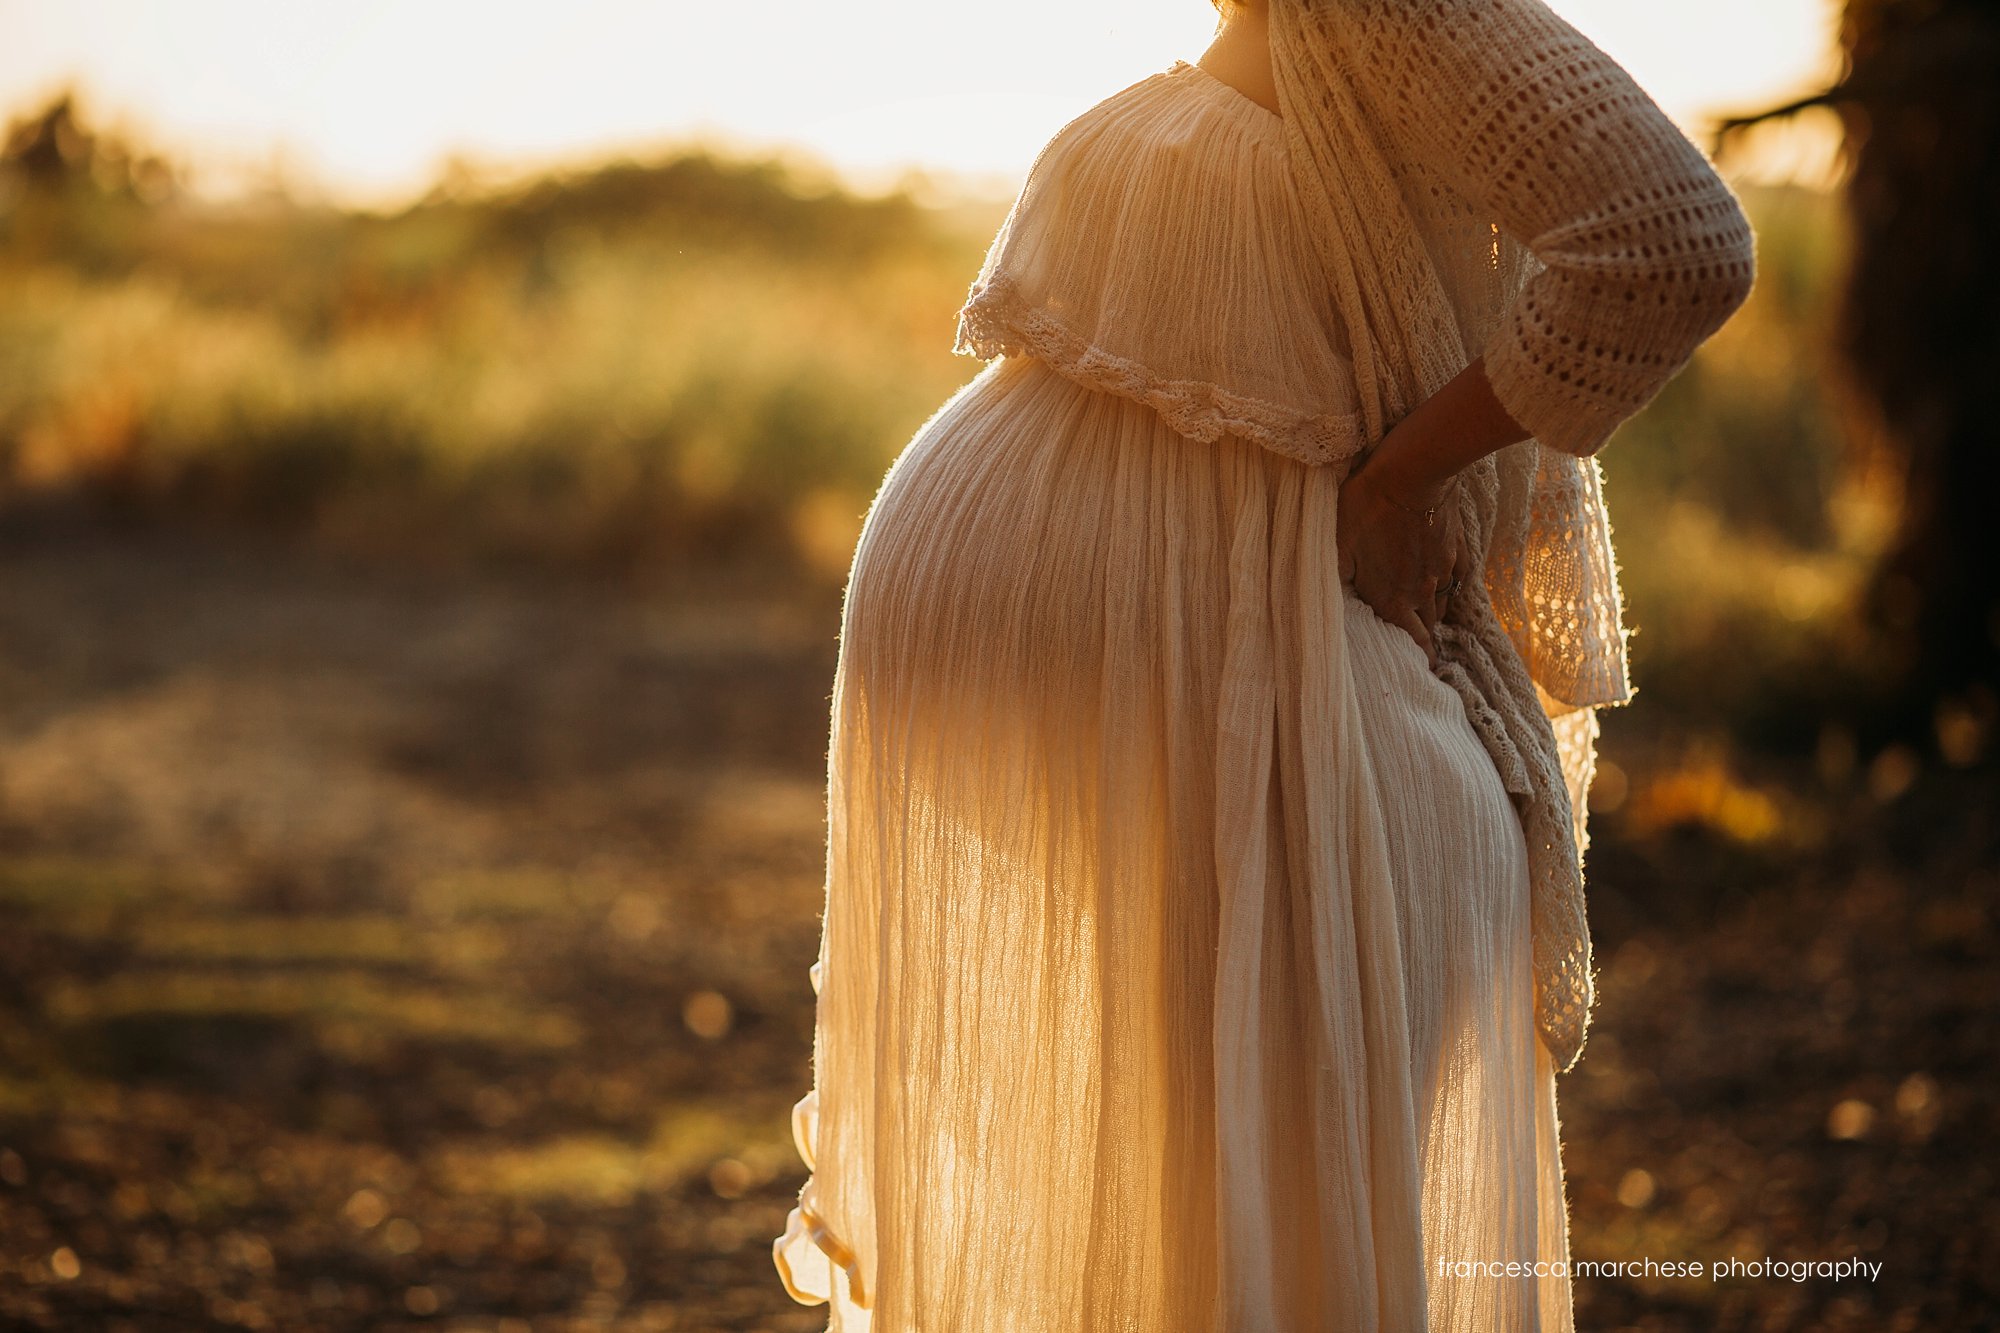 Maternity session in golden hour Orange County, CA Long Beach Francesca Marchese Photography top 100 maternity images best maternity photography